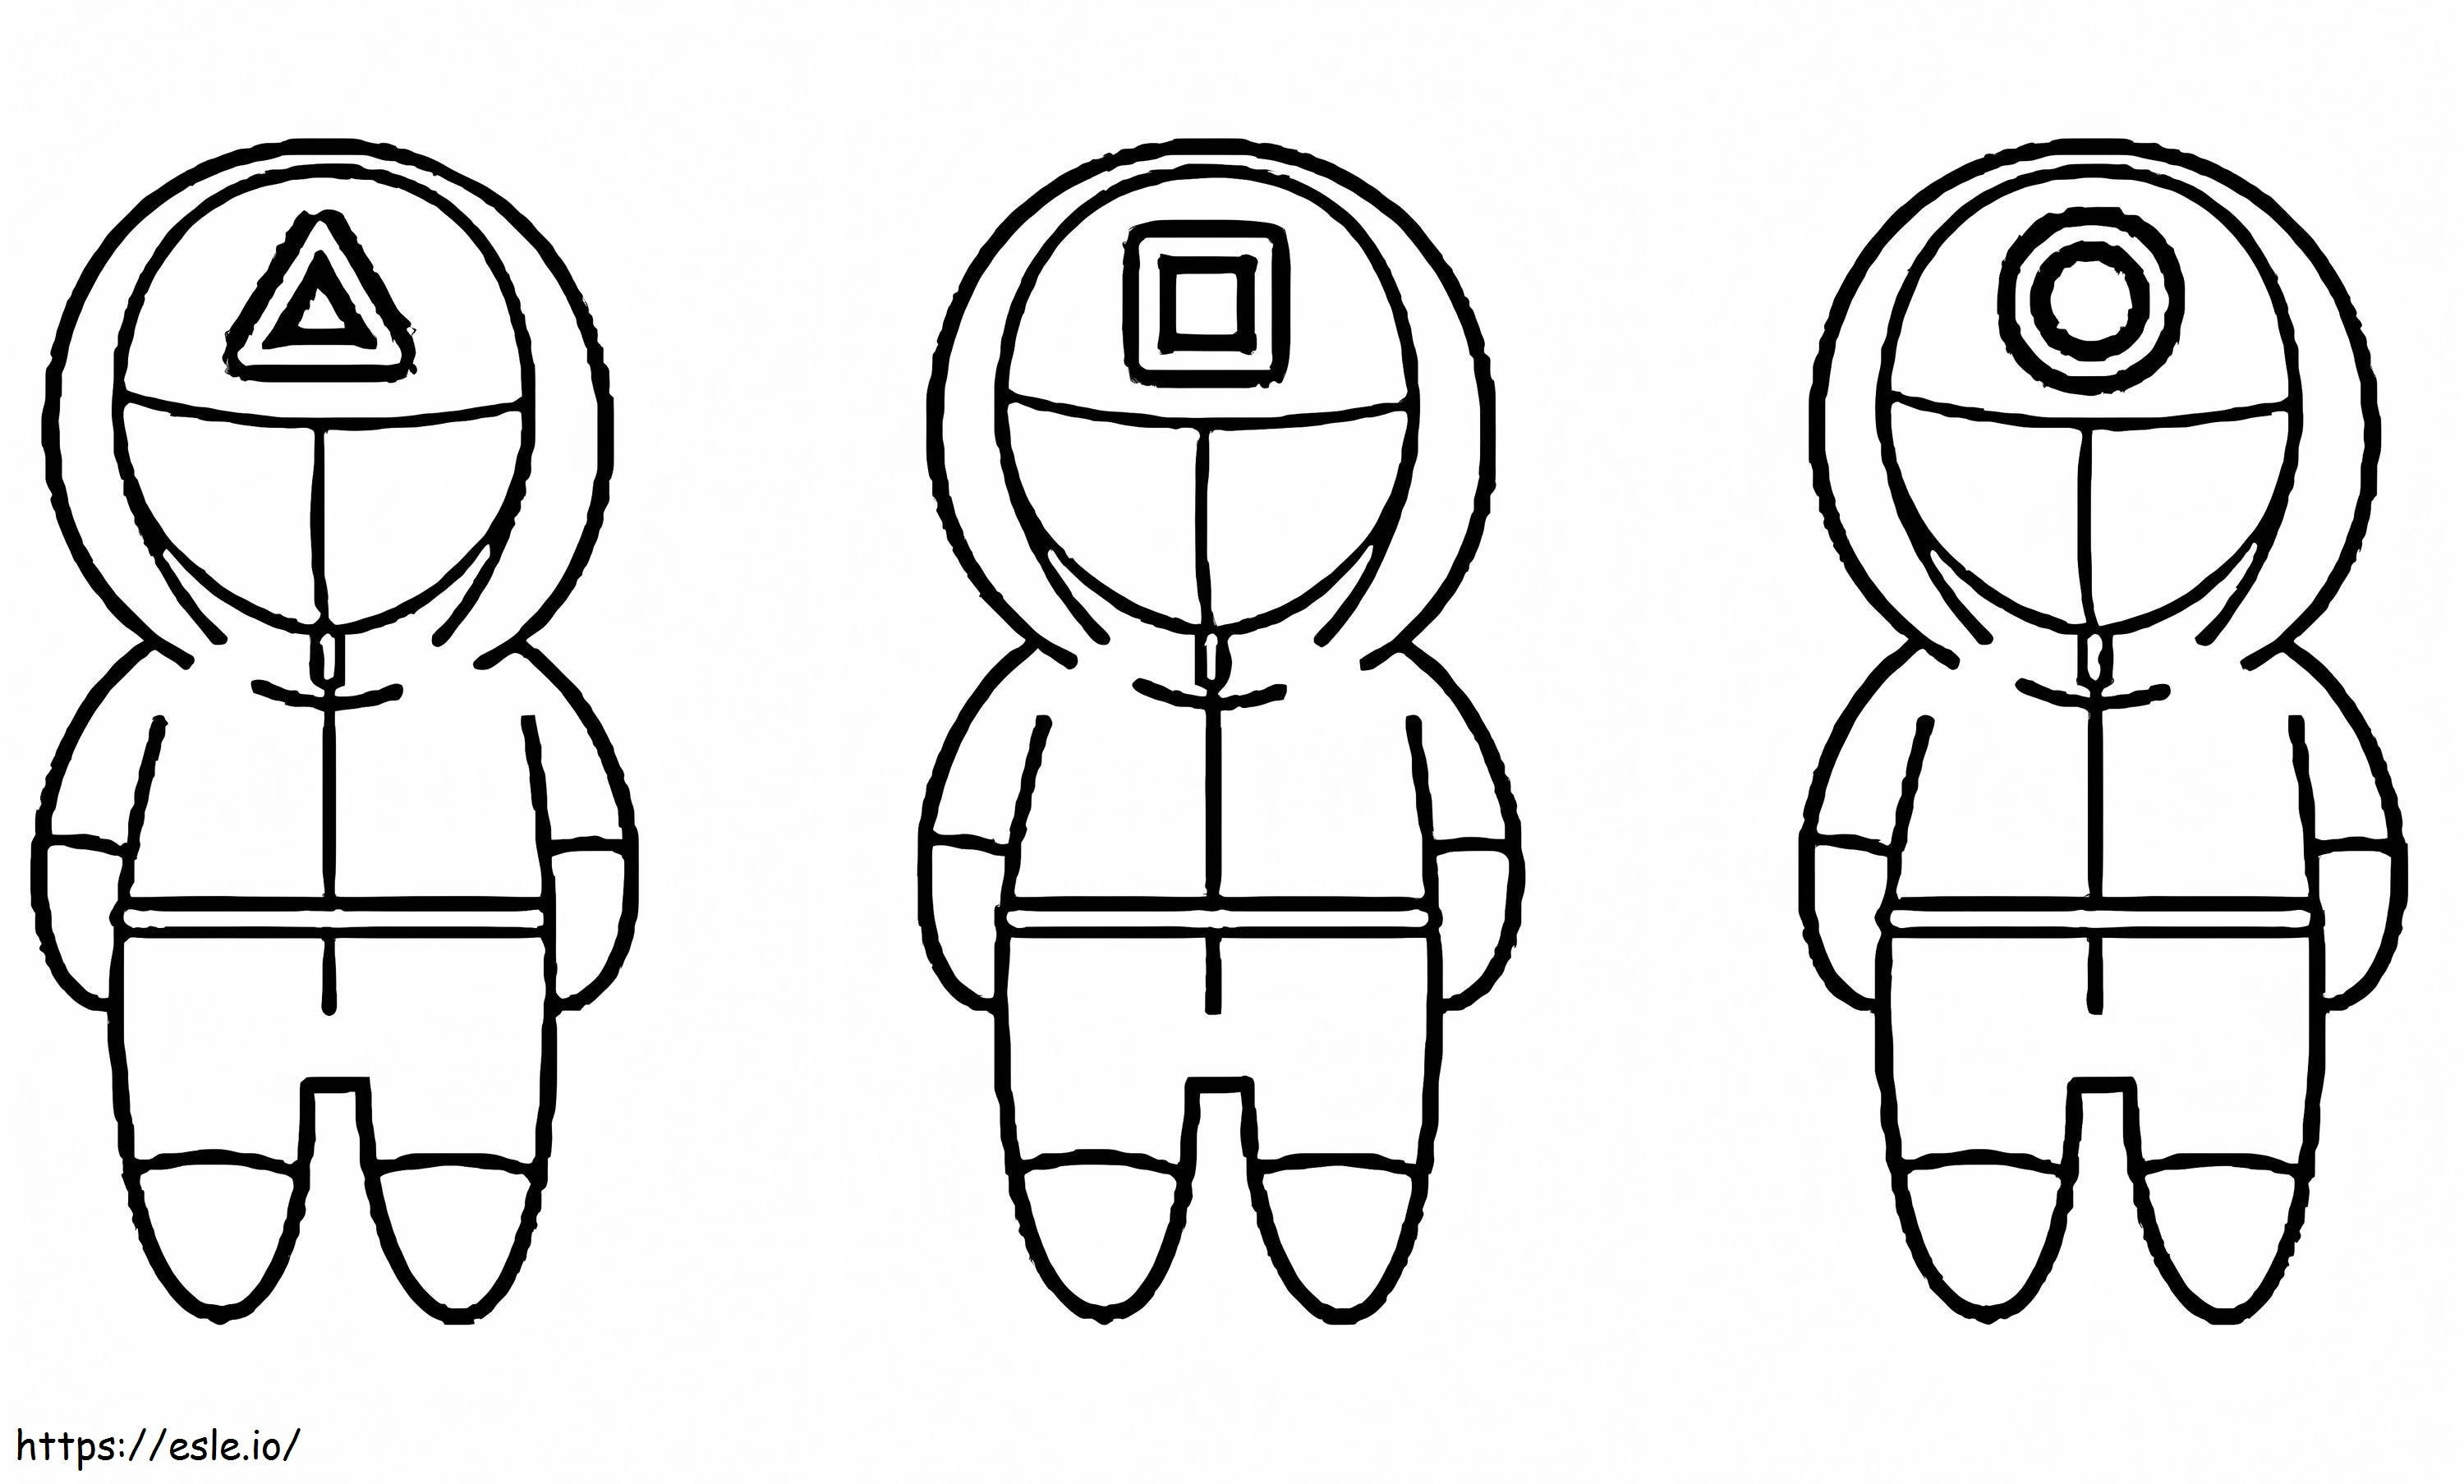 Three People Wearing Red Guard Uniform From Chibi Squid Game coloring page